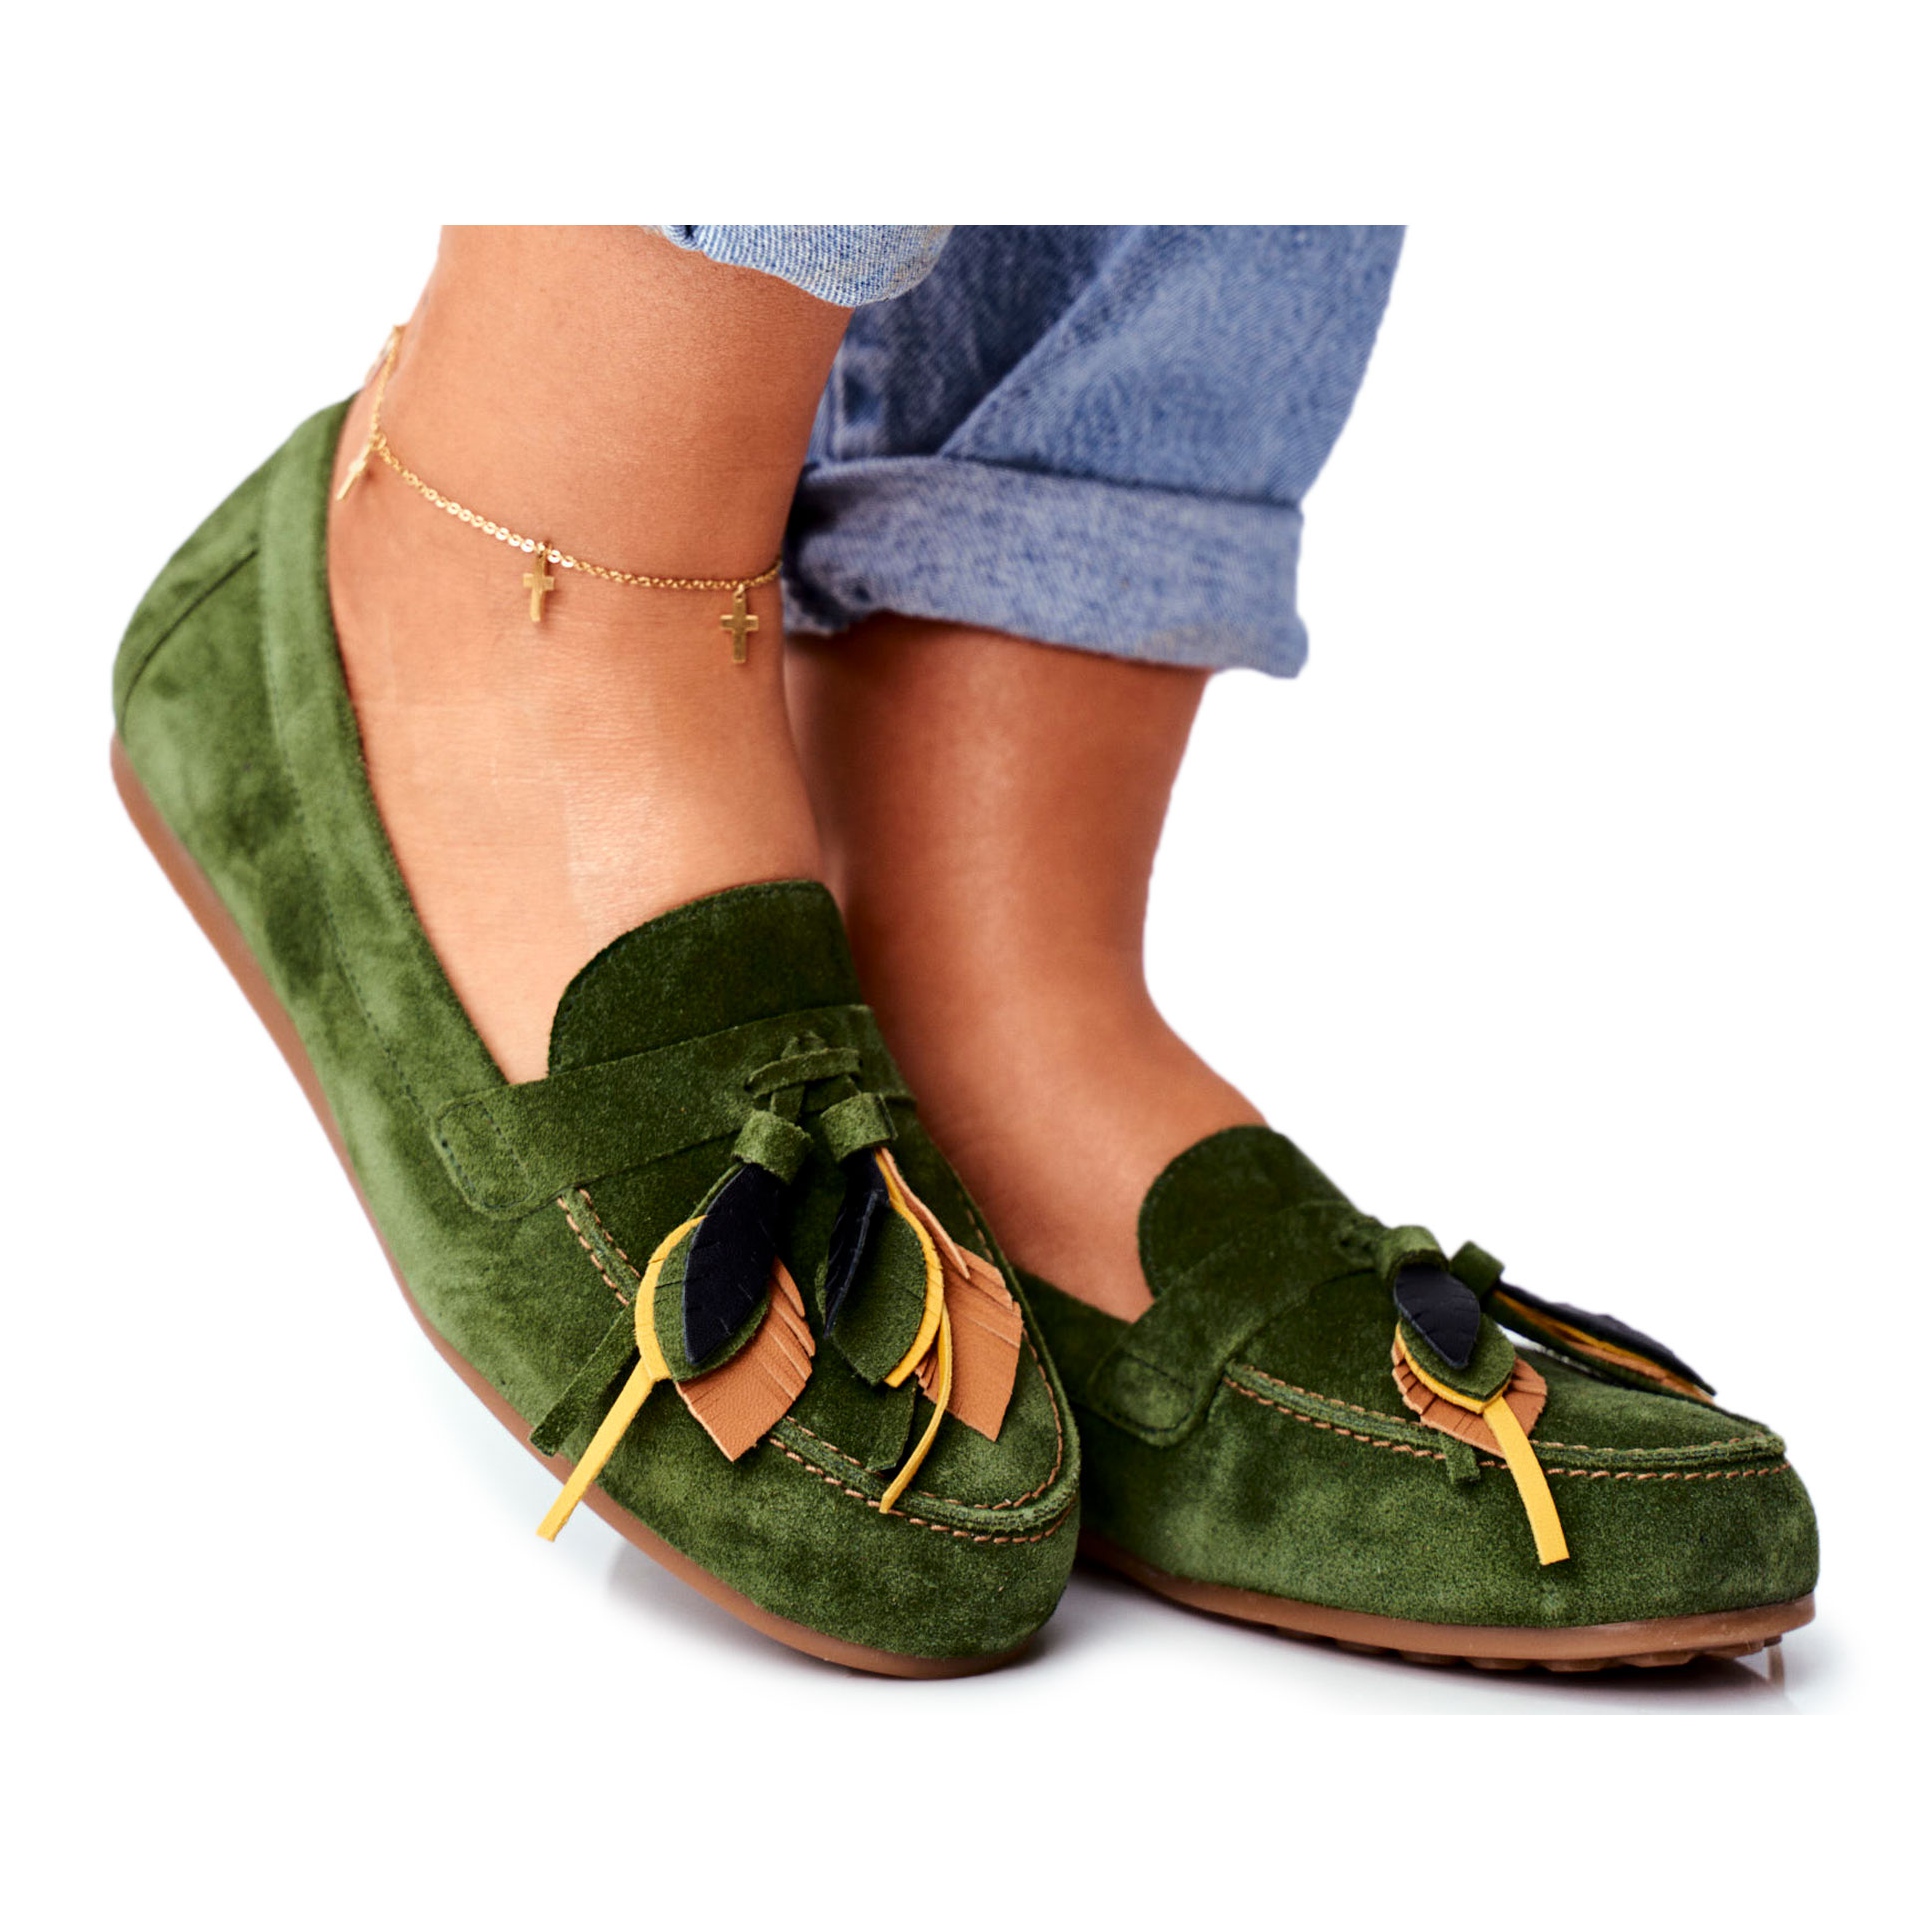 Moccasins Leather Green 04494-09 / 00 